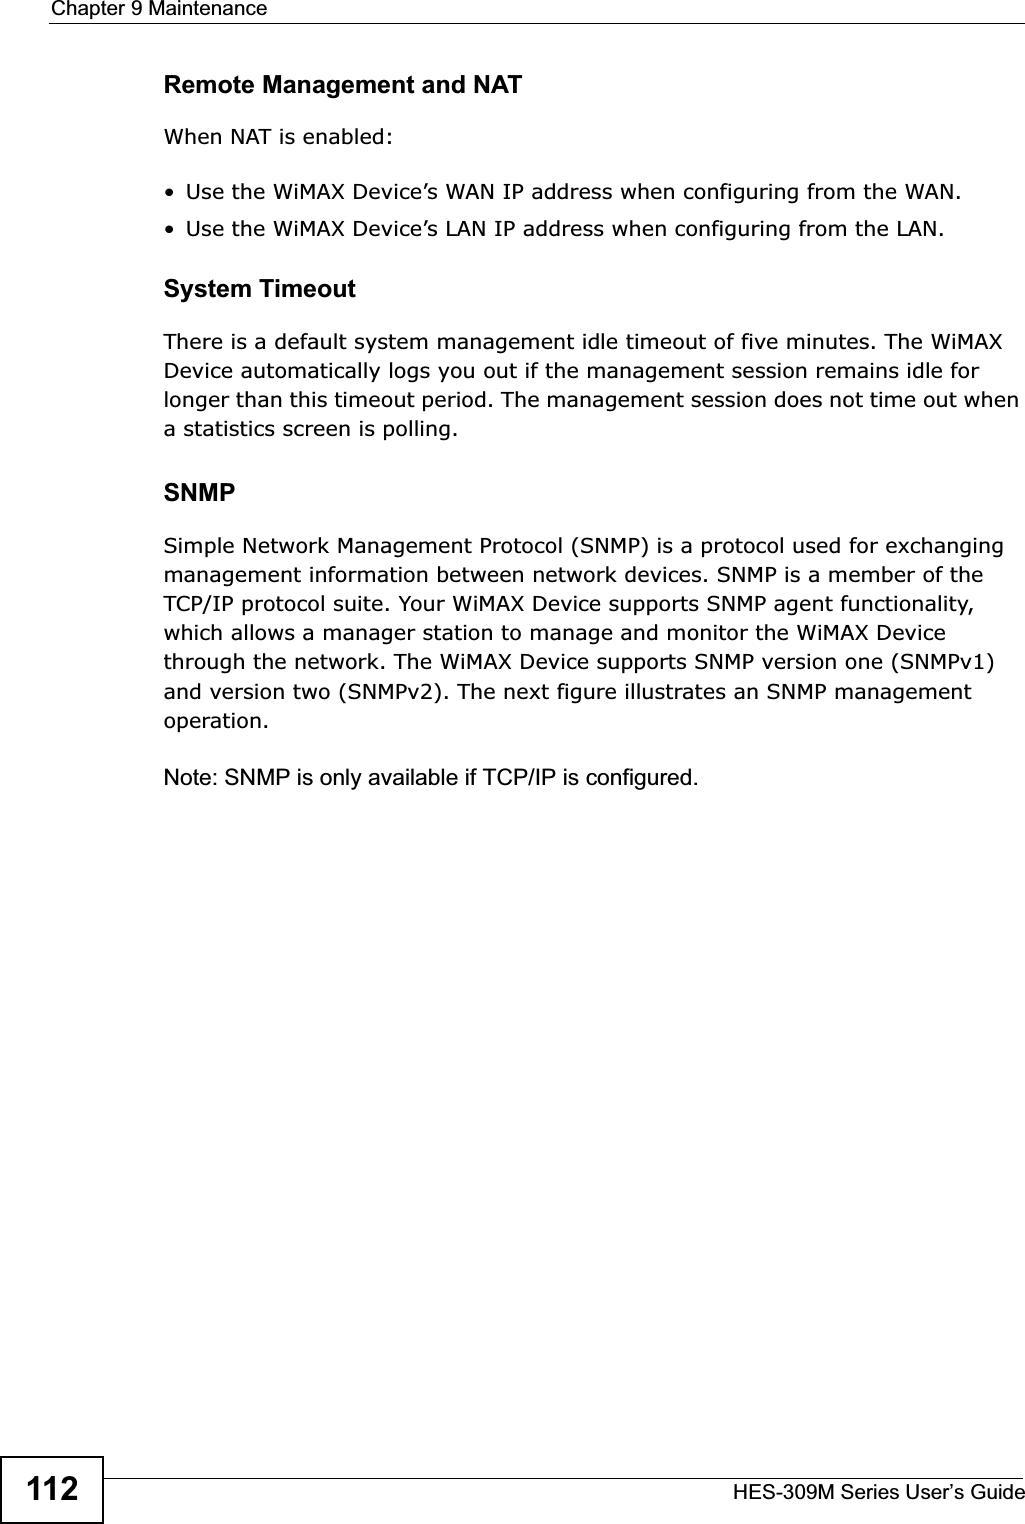 Chapter 9 MaintenanceHES-309M Series User’s Guide112Remote Management and NATWhen NAT is enabled:• Use the WiMAX Device’s WAN IP address when configuring from the WAN. • Use the WiMAX Device’s LAN IP address when configuring from the LAN.System TimeoutThere is a default system management idle timeout of five minutes. The WiMAX Device automatically logs you out if the management session remains idle for longer than this timeout period. The management session does not time out when a statistics screen is polling.SNMPSimple Network Management Protocol (SNMP) is a protocol used for exchanging management information between network devices. SNMP is a member of the TCP/IP protocol suite. Your WiMAX Device supports SNMP agent functionality, which allows a manager station to manage and monitor the WiMAX Device through the network. The WiMAX Device supports SNMP version one (SNMPv1) and version two (SNMPv2). The next figure illustrates an SNMP management operation.Note: SNMP is only available if TCP/IP is configured.